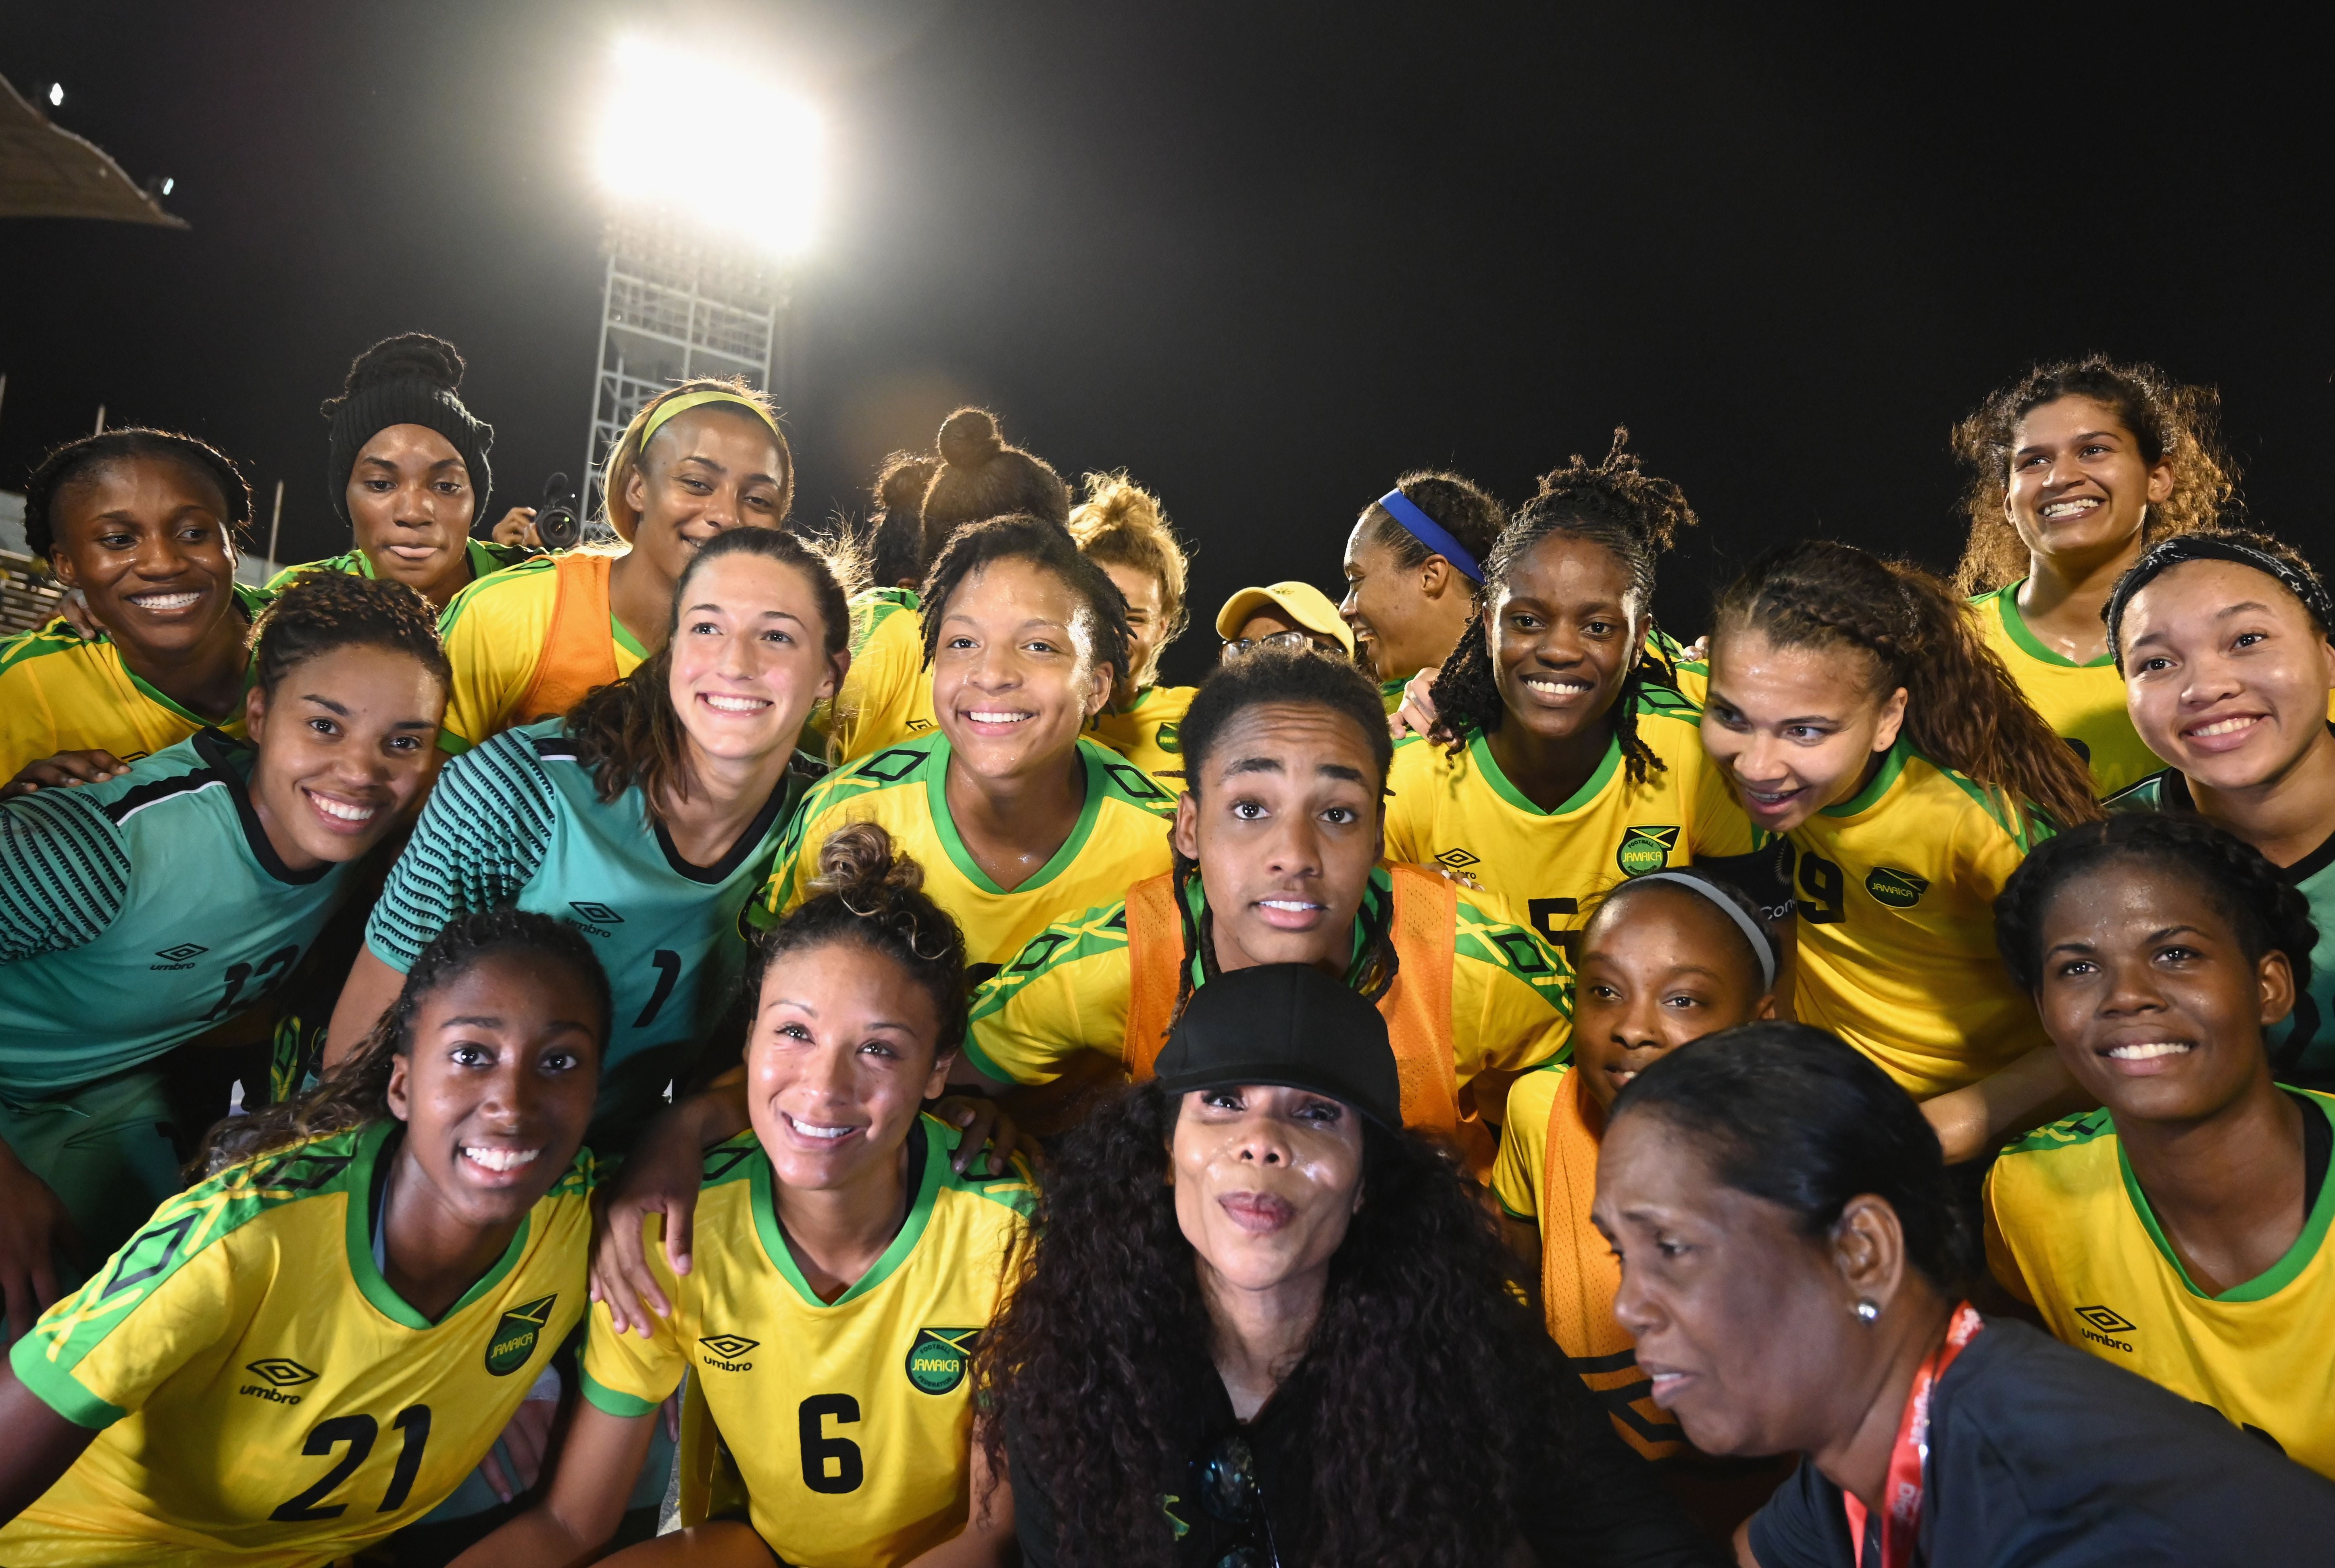 The Jamaican Women S National Soccer Team Makes Historic Debut At Women